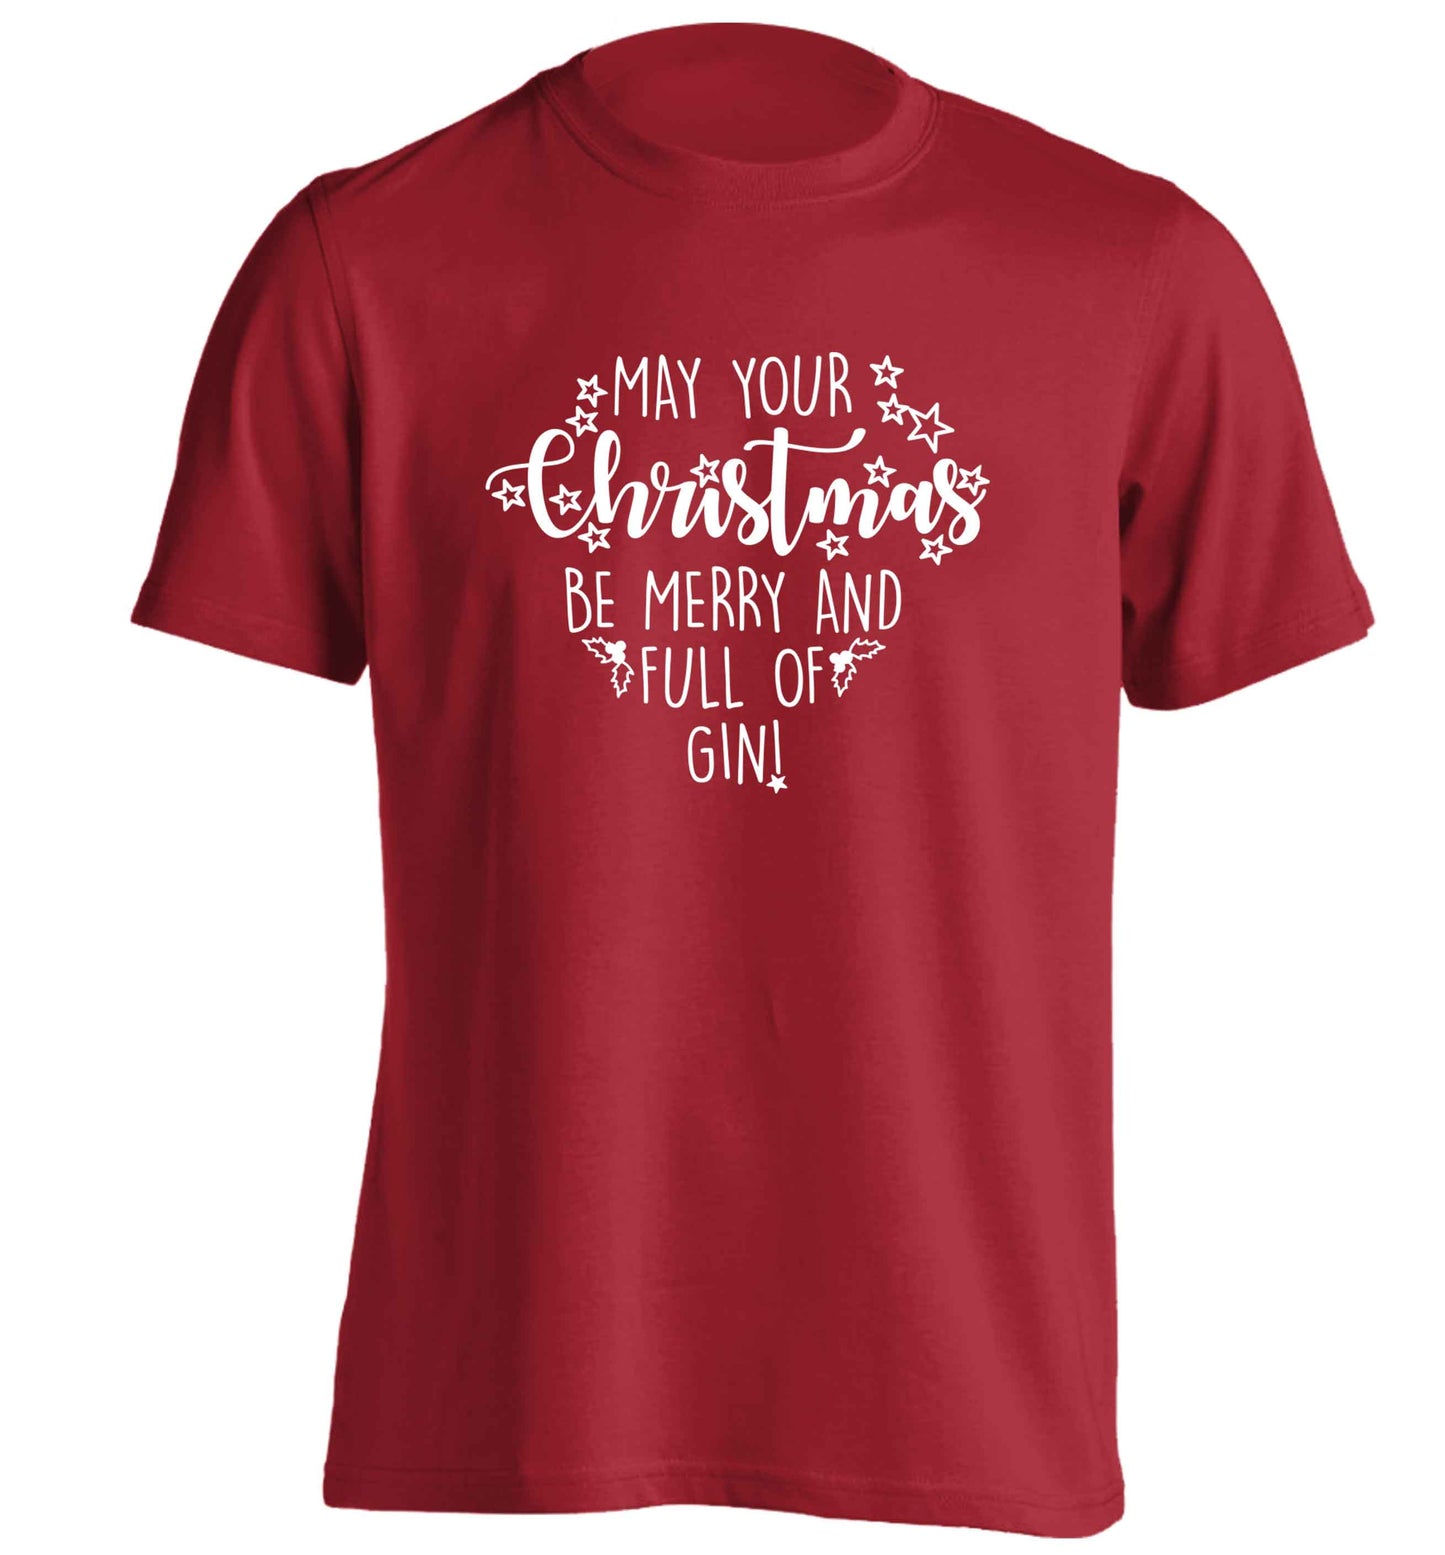 May your Christmas be merry and full of gin adults unisex red Tshirt 2XL